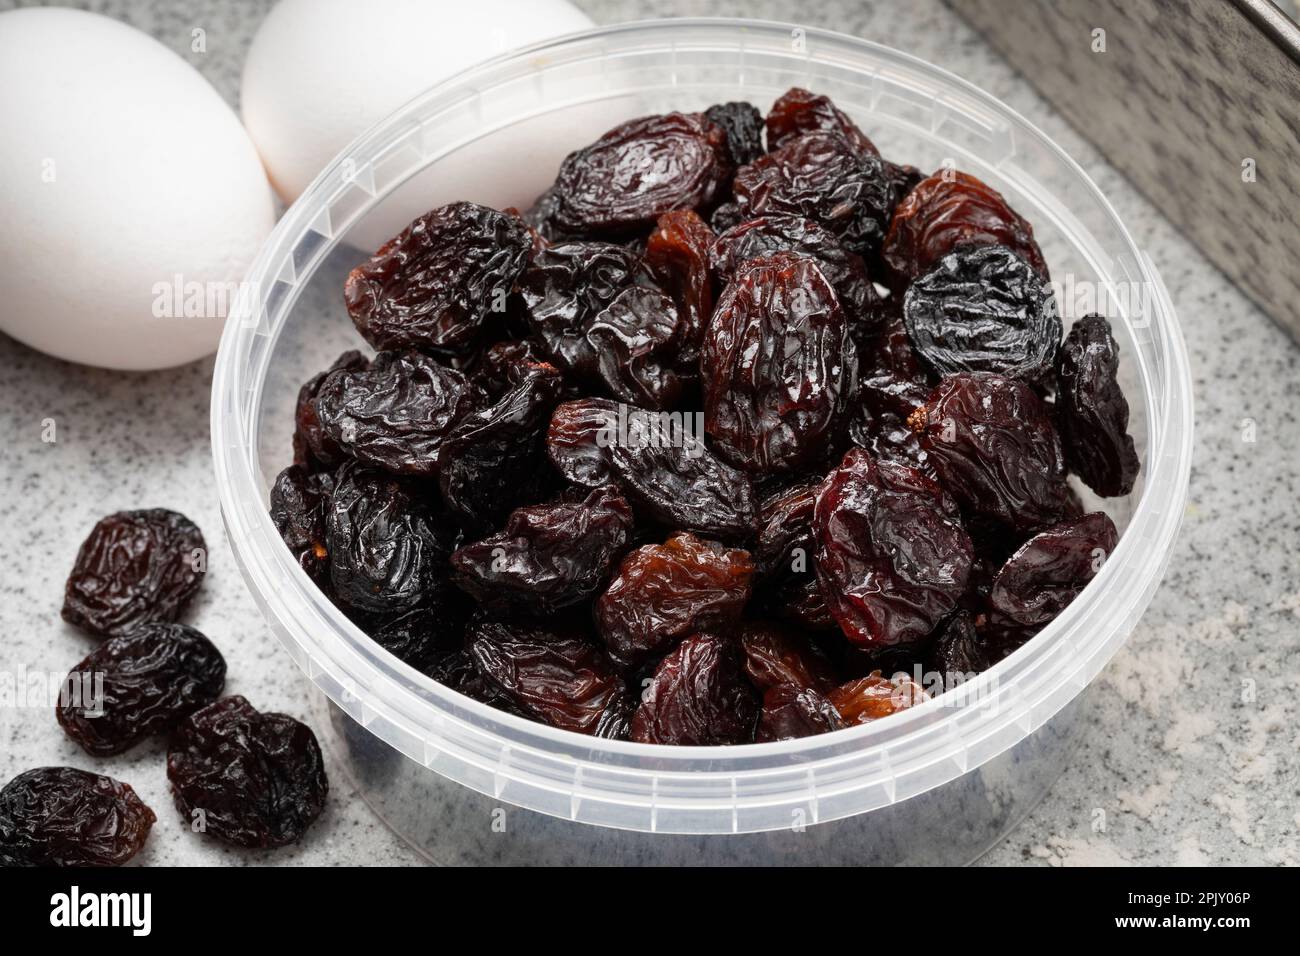 Plastic bowl with black flame raisins from Chili close up for baking Stock Photo